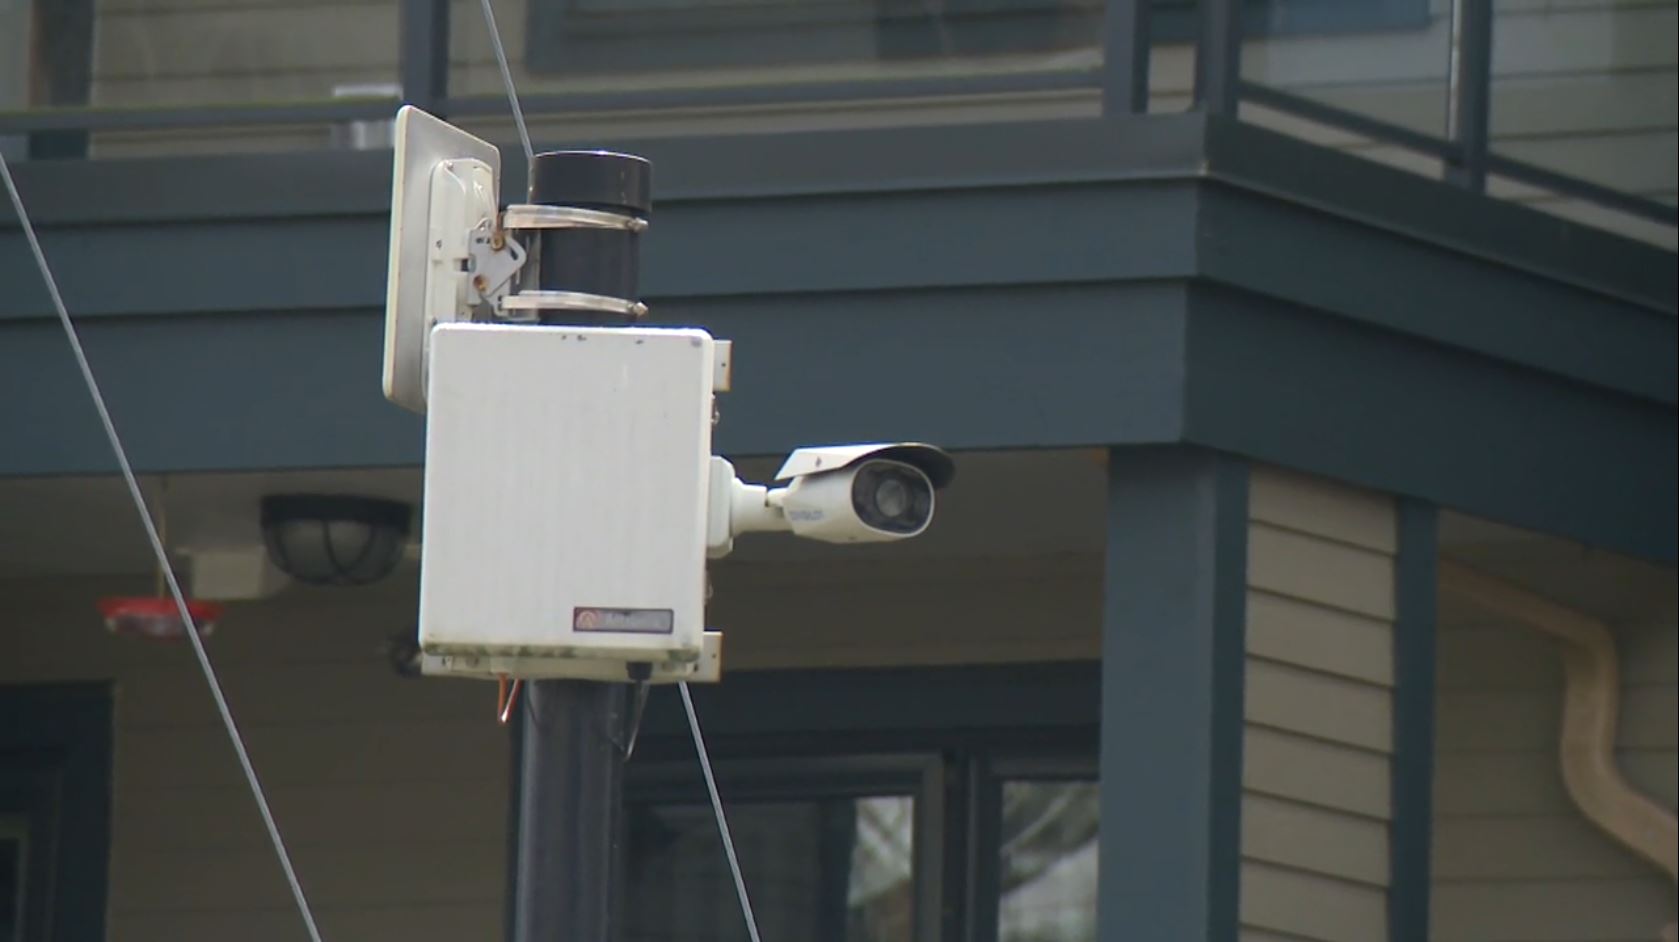 City of White Rock mulling CCTV cameras for public safety